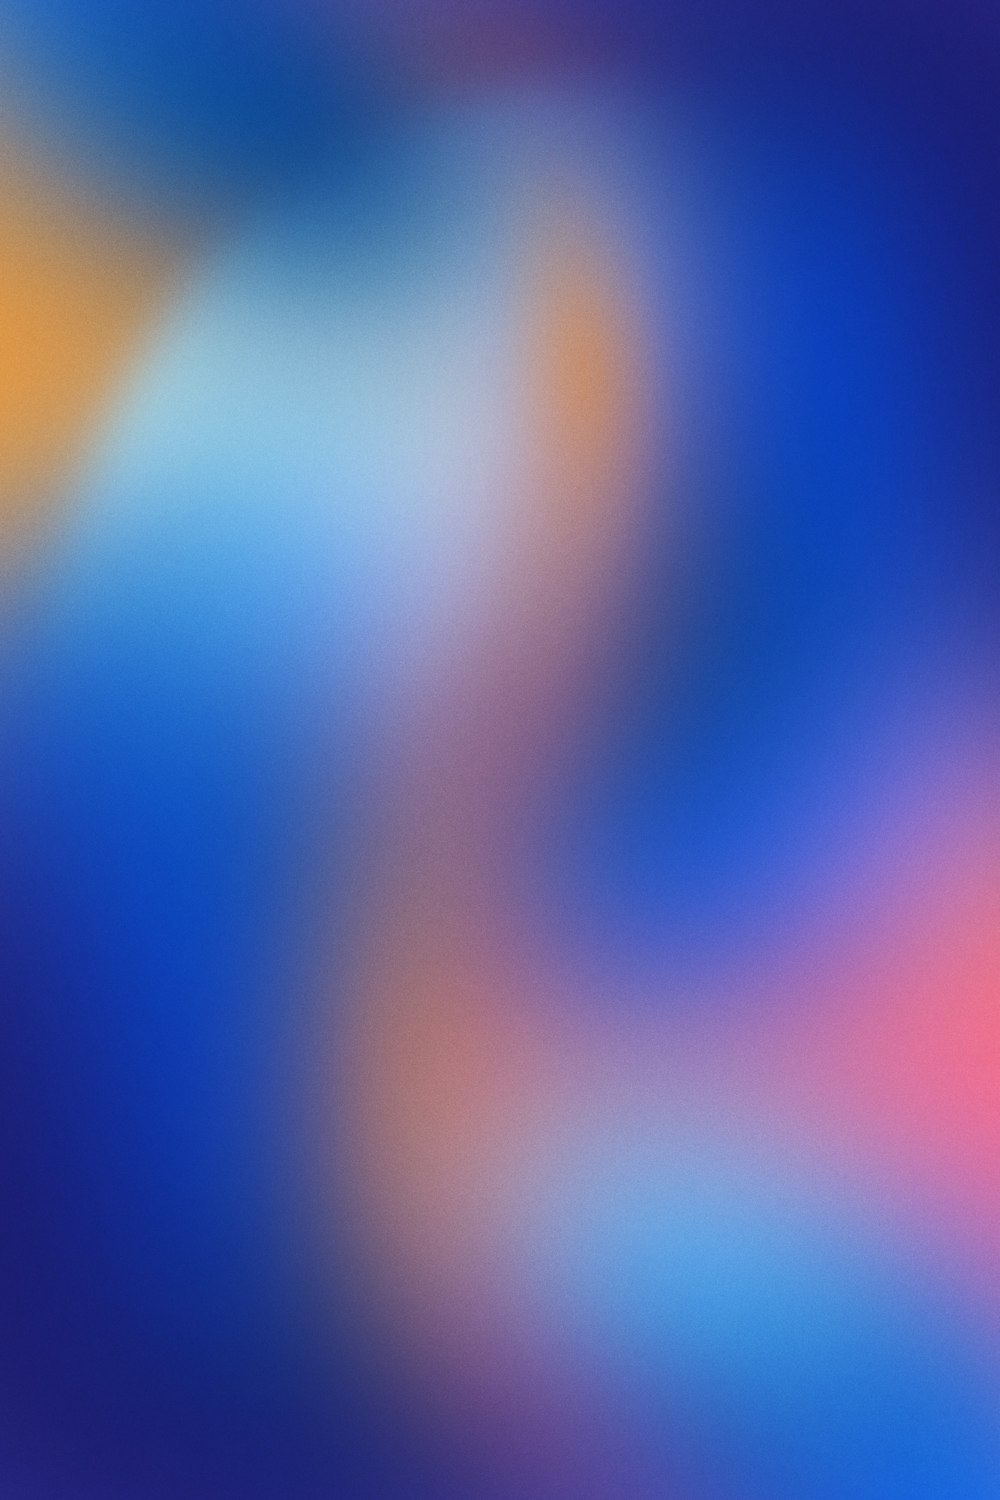 a blurry image of a blue and orange background